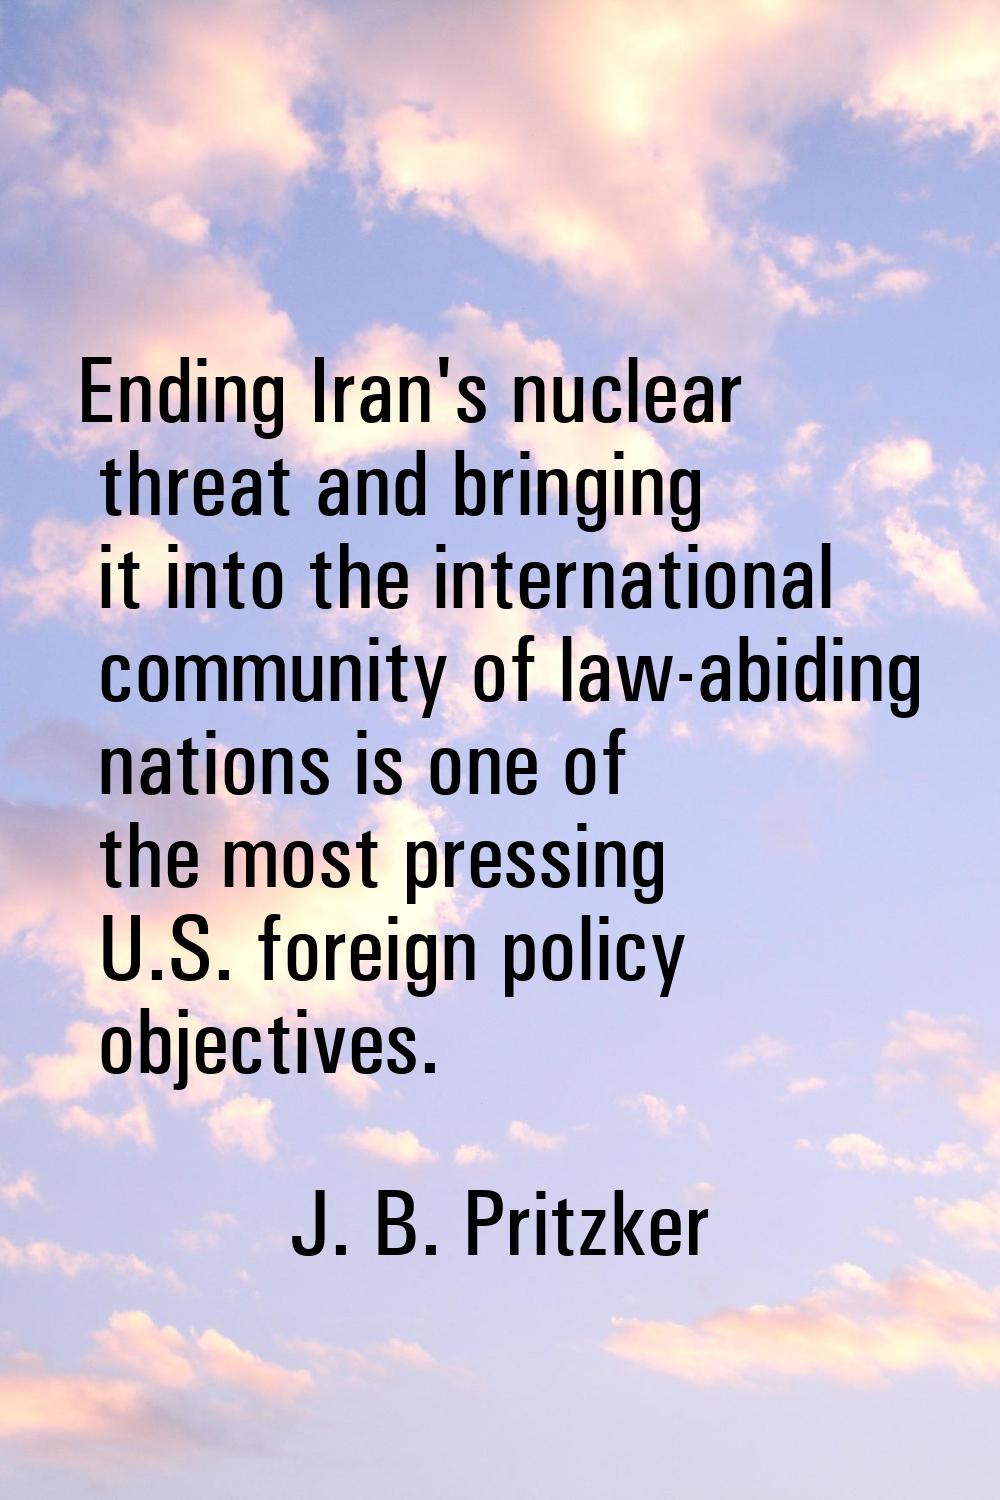 Ending Iran's nuclear threat and bringing it into the international community of law-abiding nation